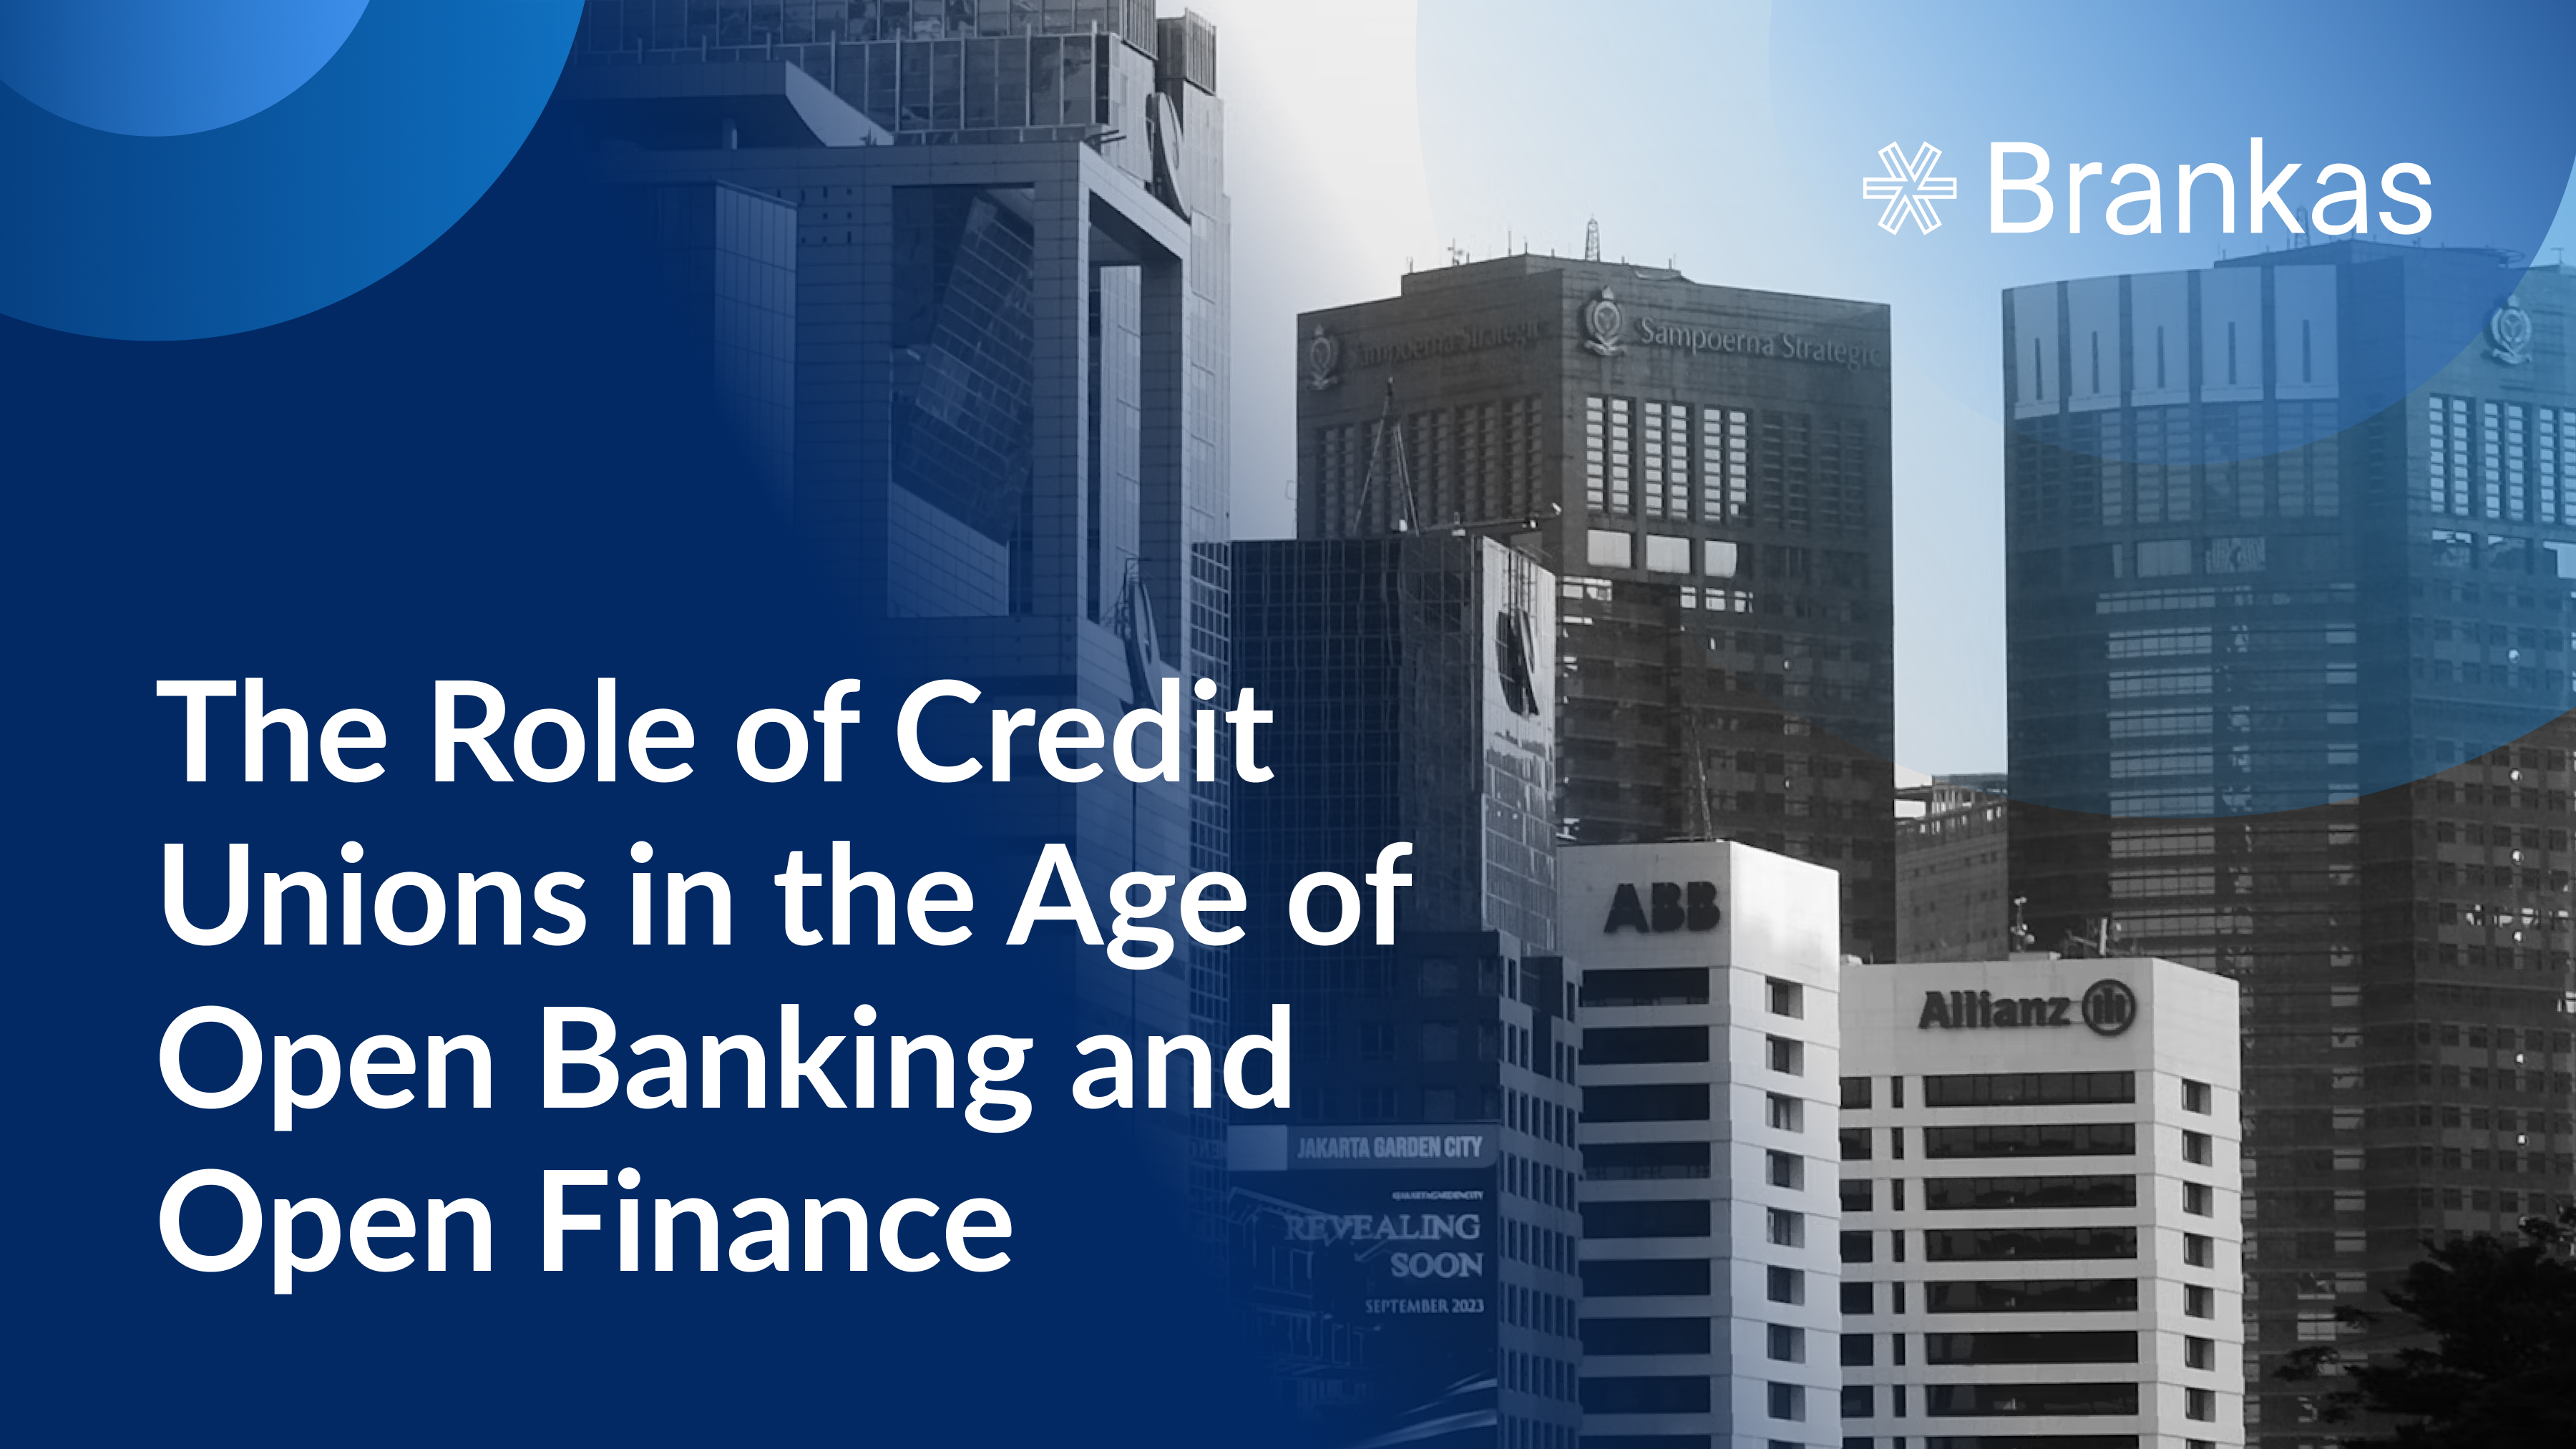 The Role of Credit Unions in the Age of Open Banking and Open Finance